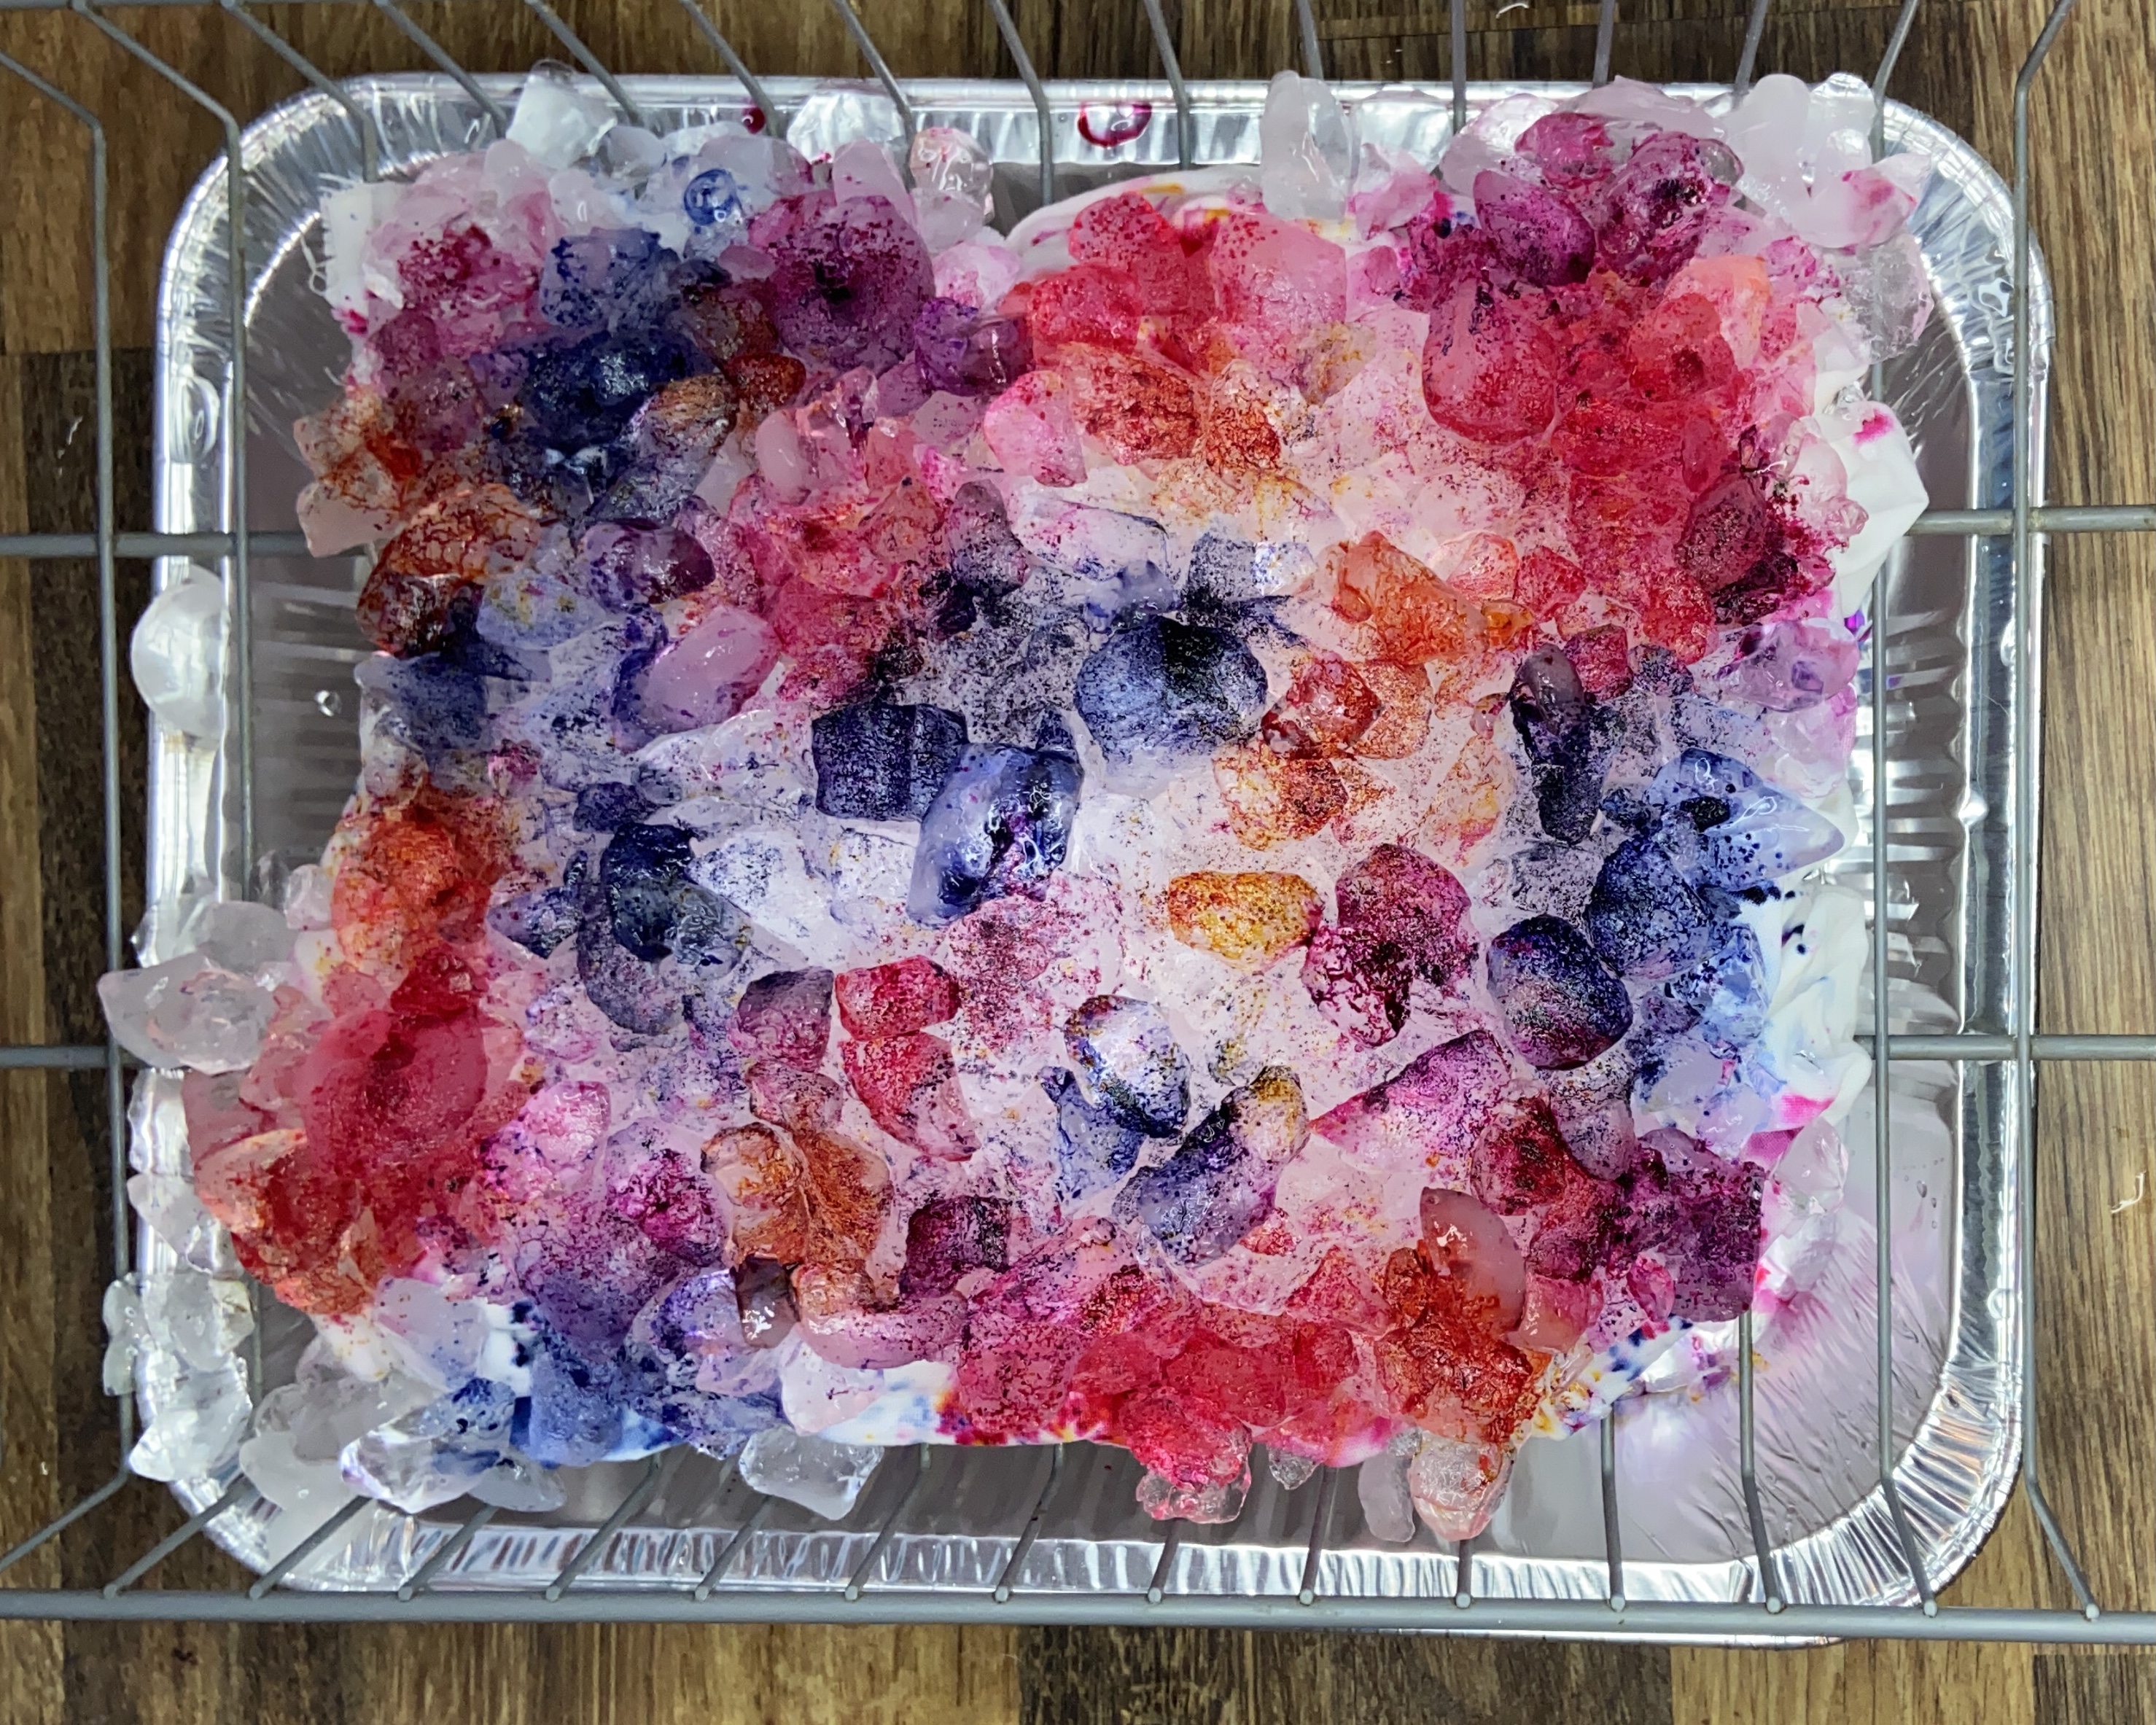 How to ice dye step 5